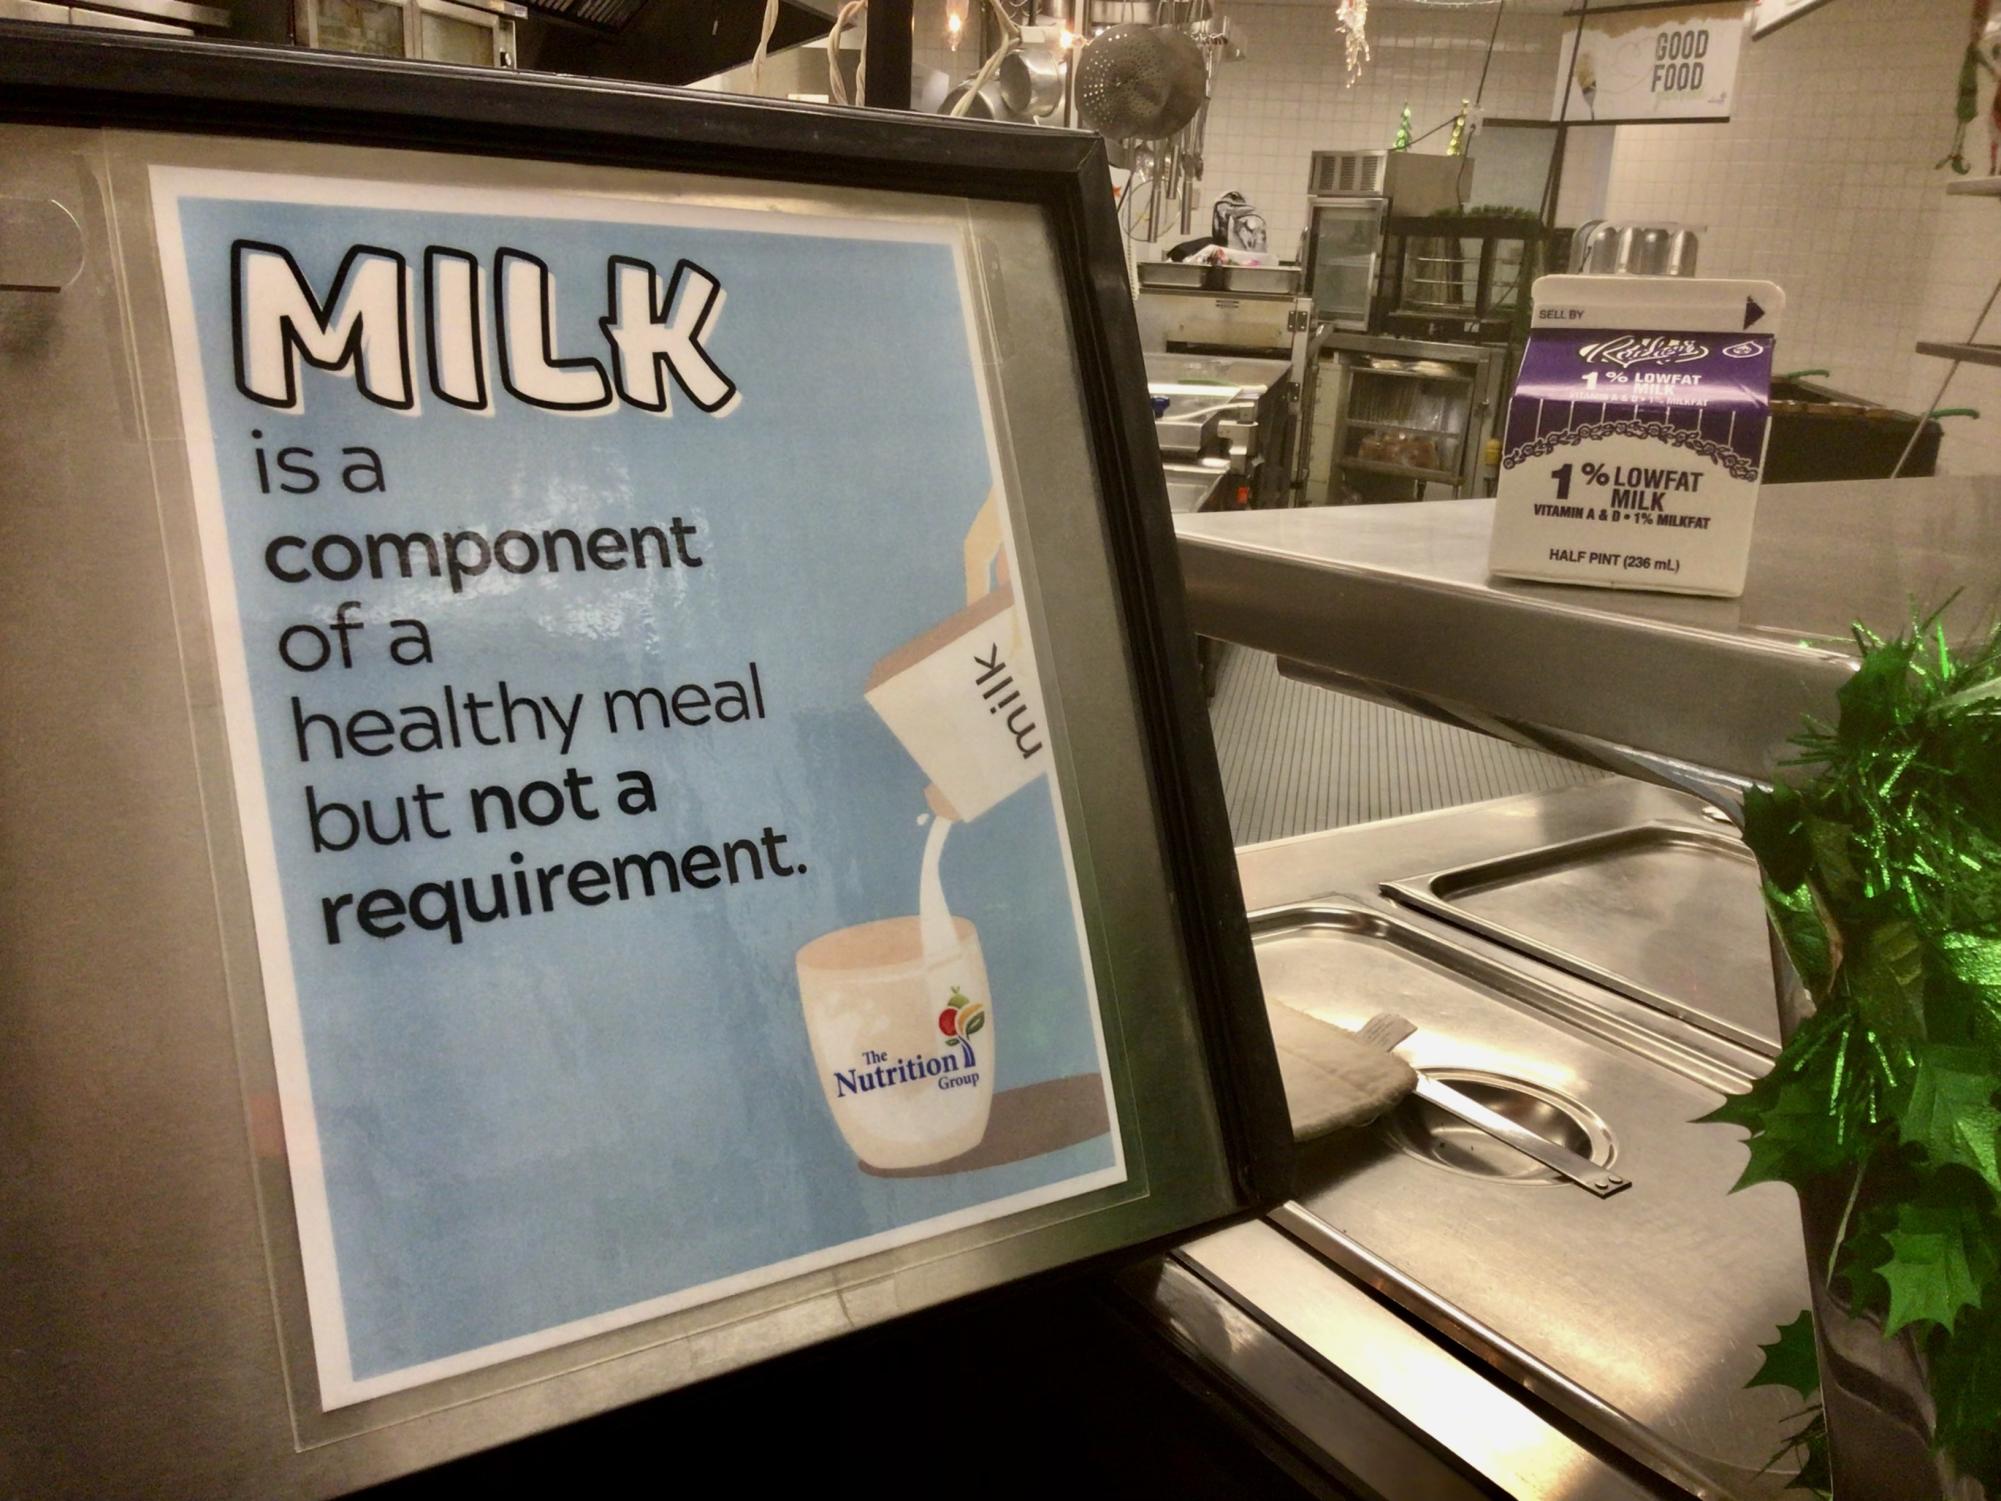 America is facing a national milk carton shortage, and it may come to affect our area.